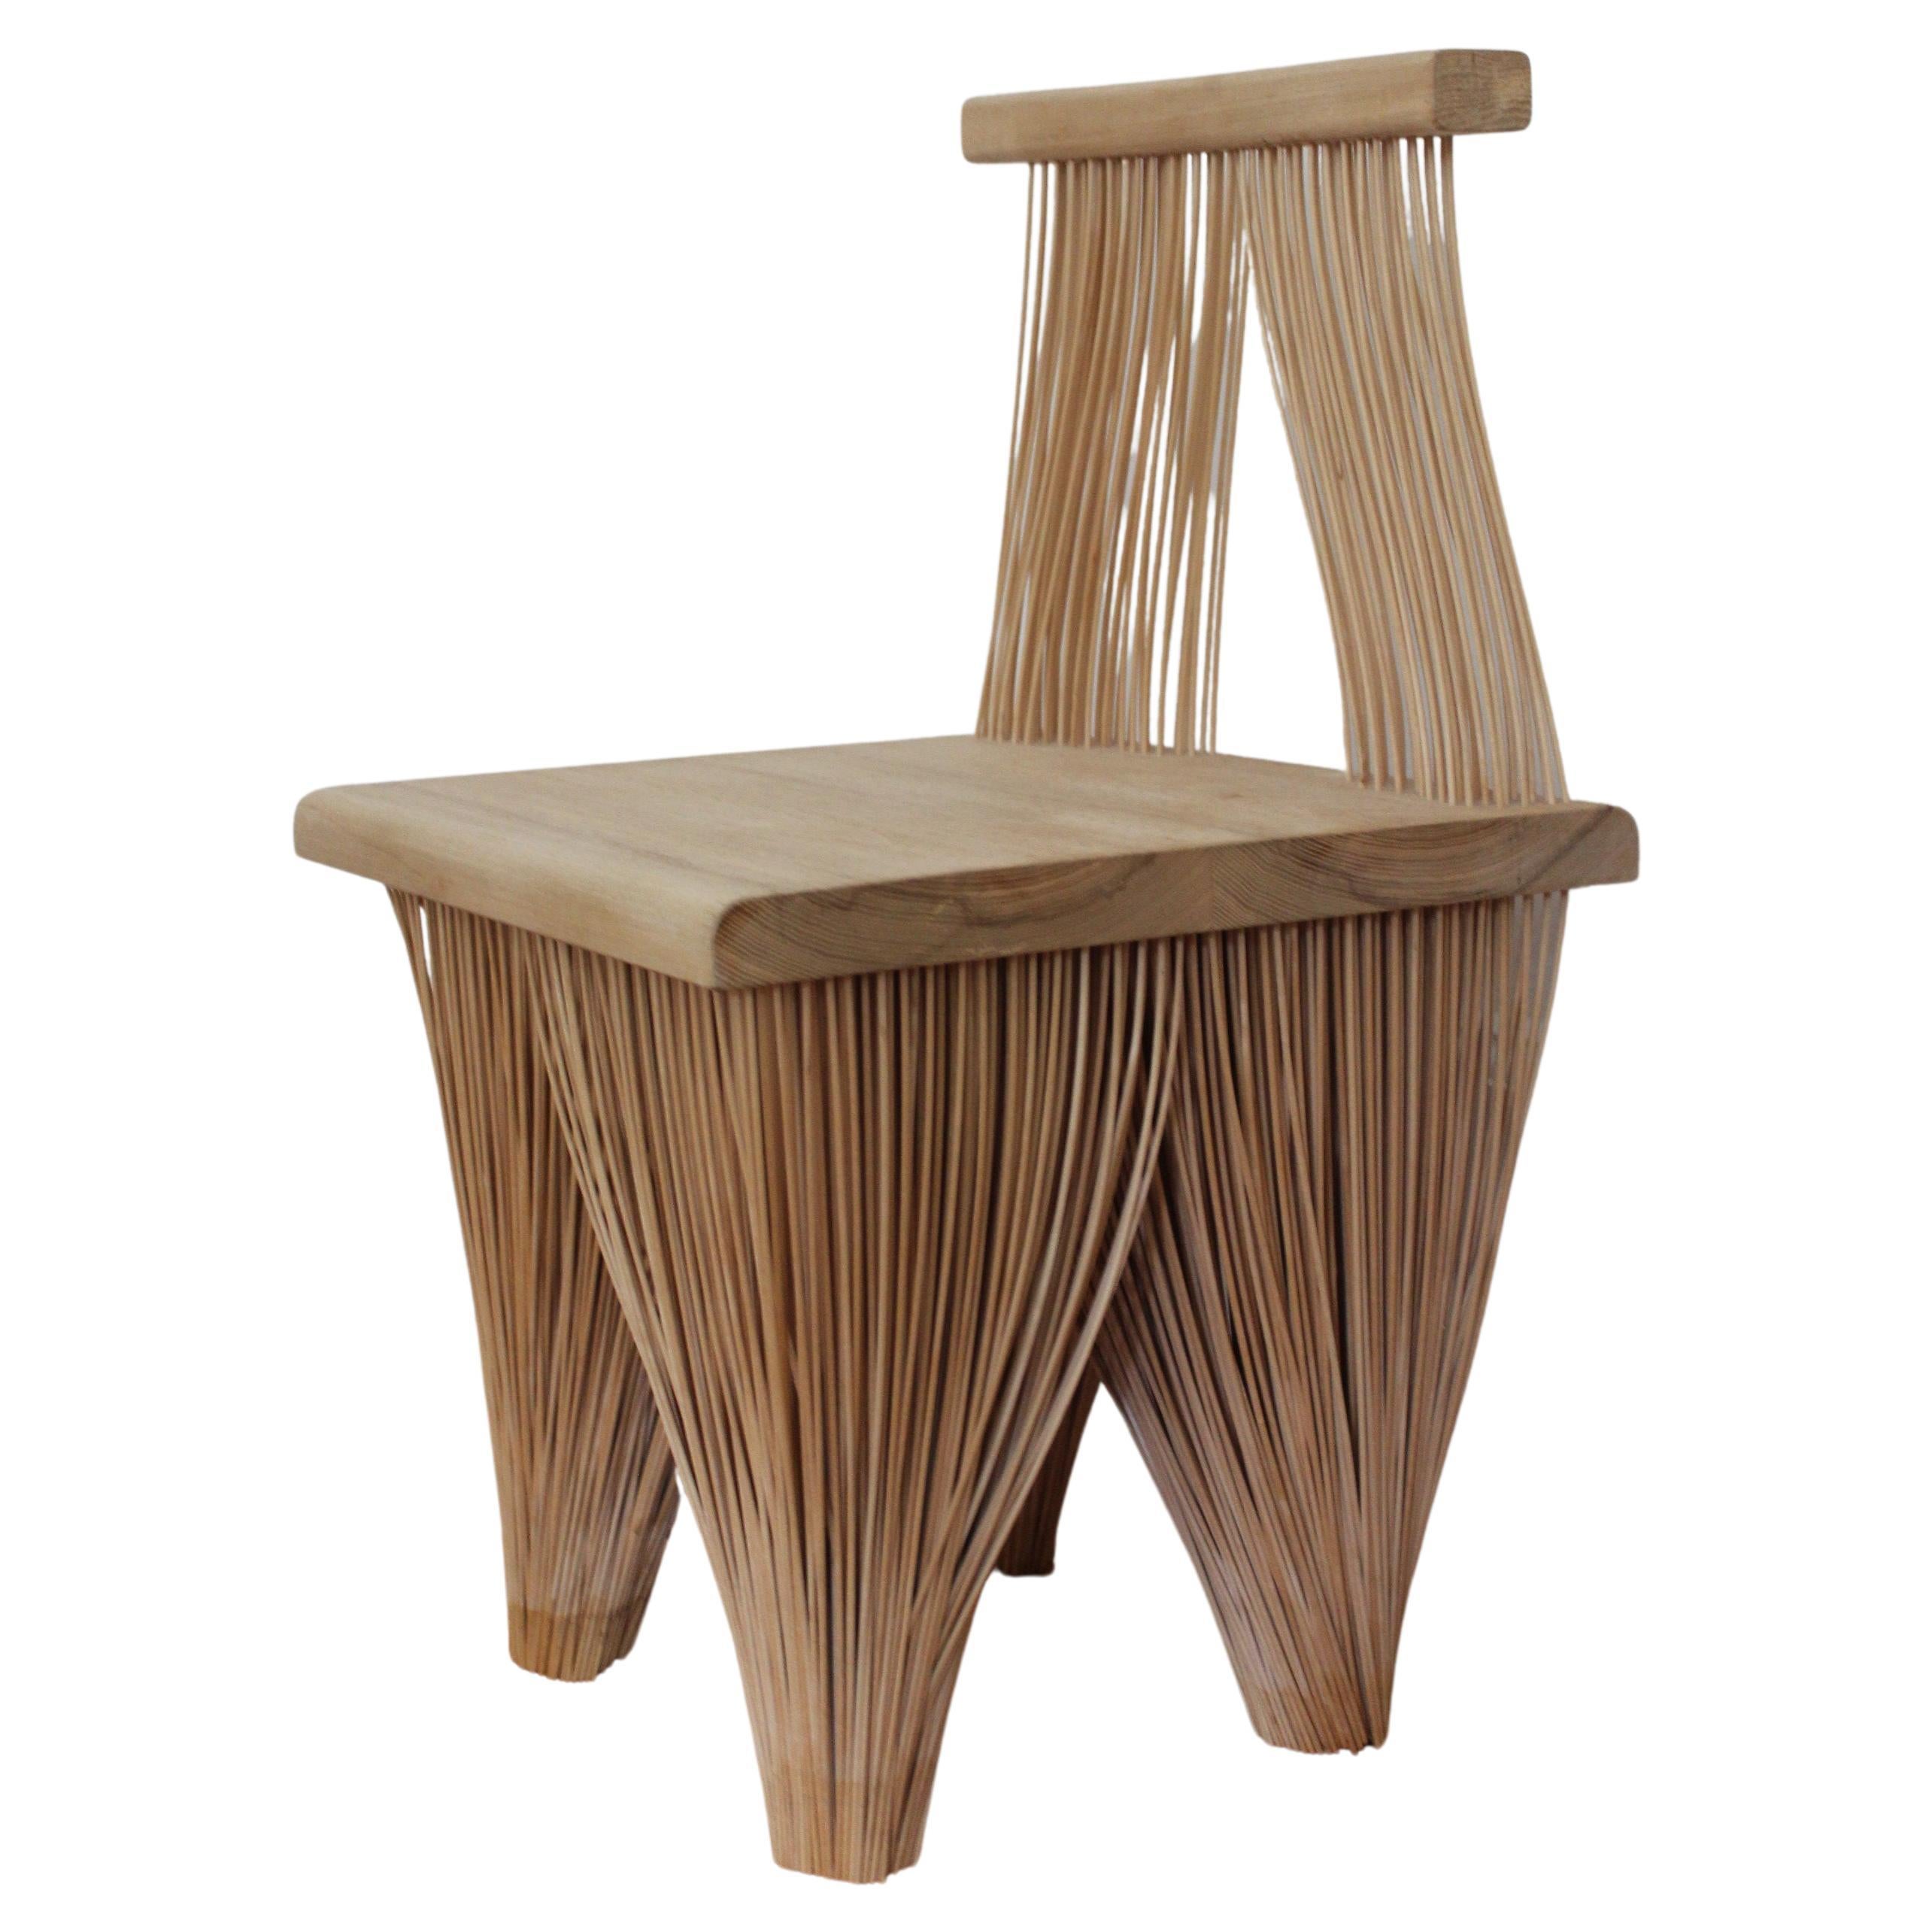 Contemporary Japanese Inspired Wood Hallway Statement Sculptural Chair 